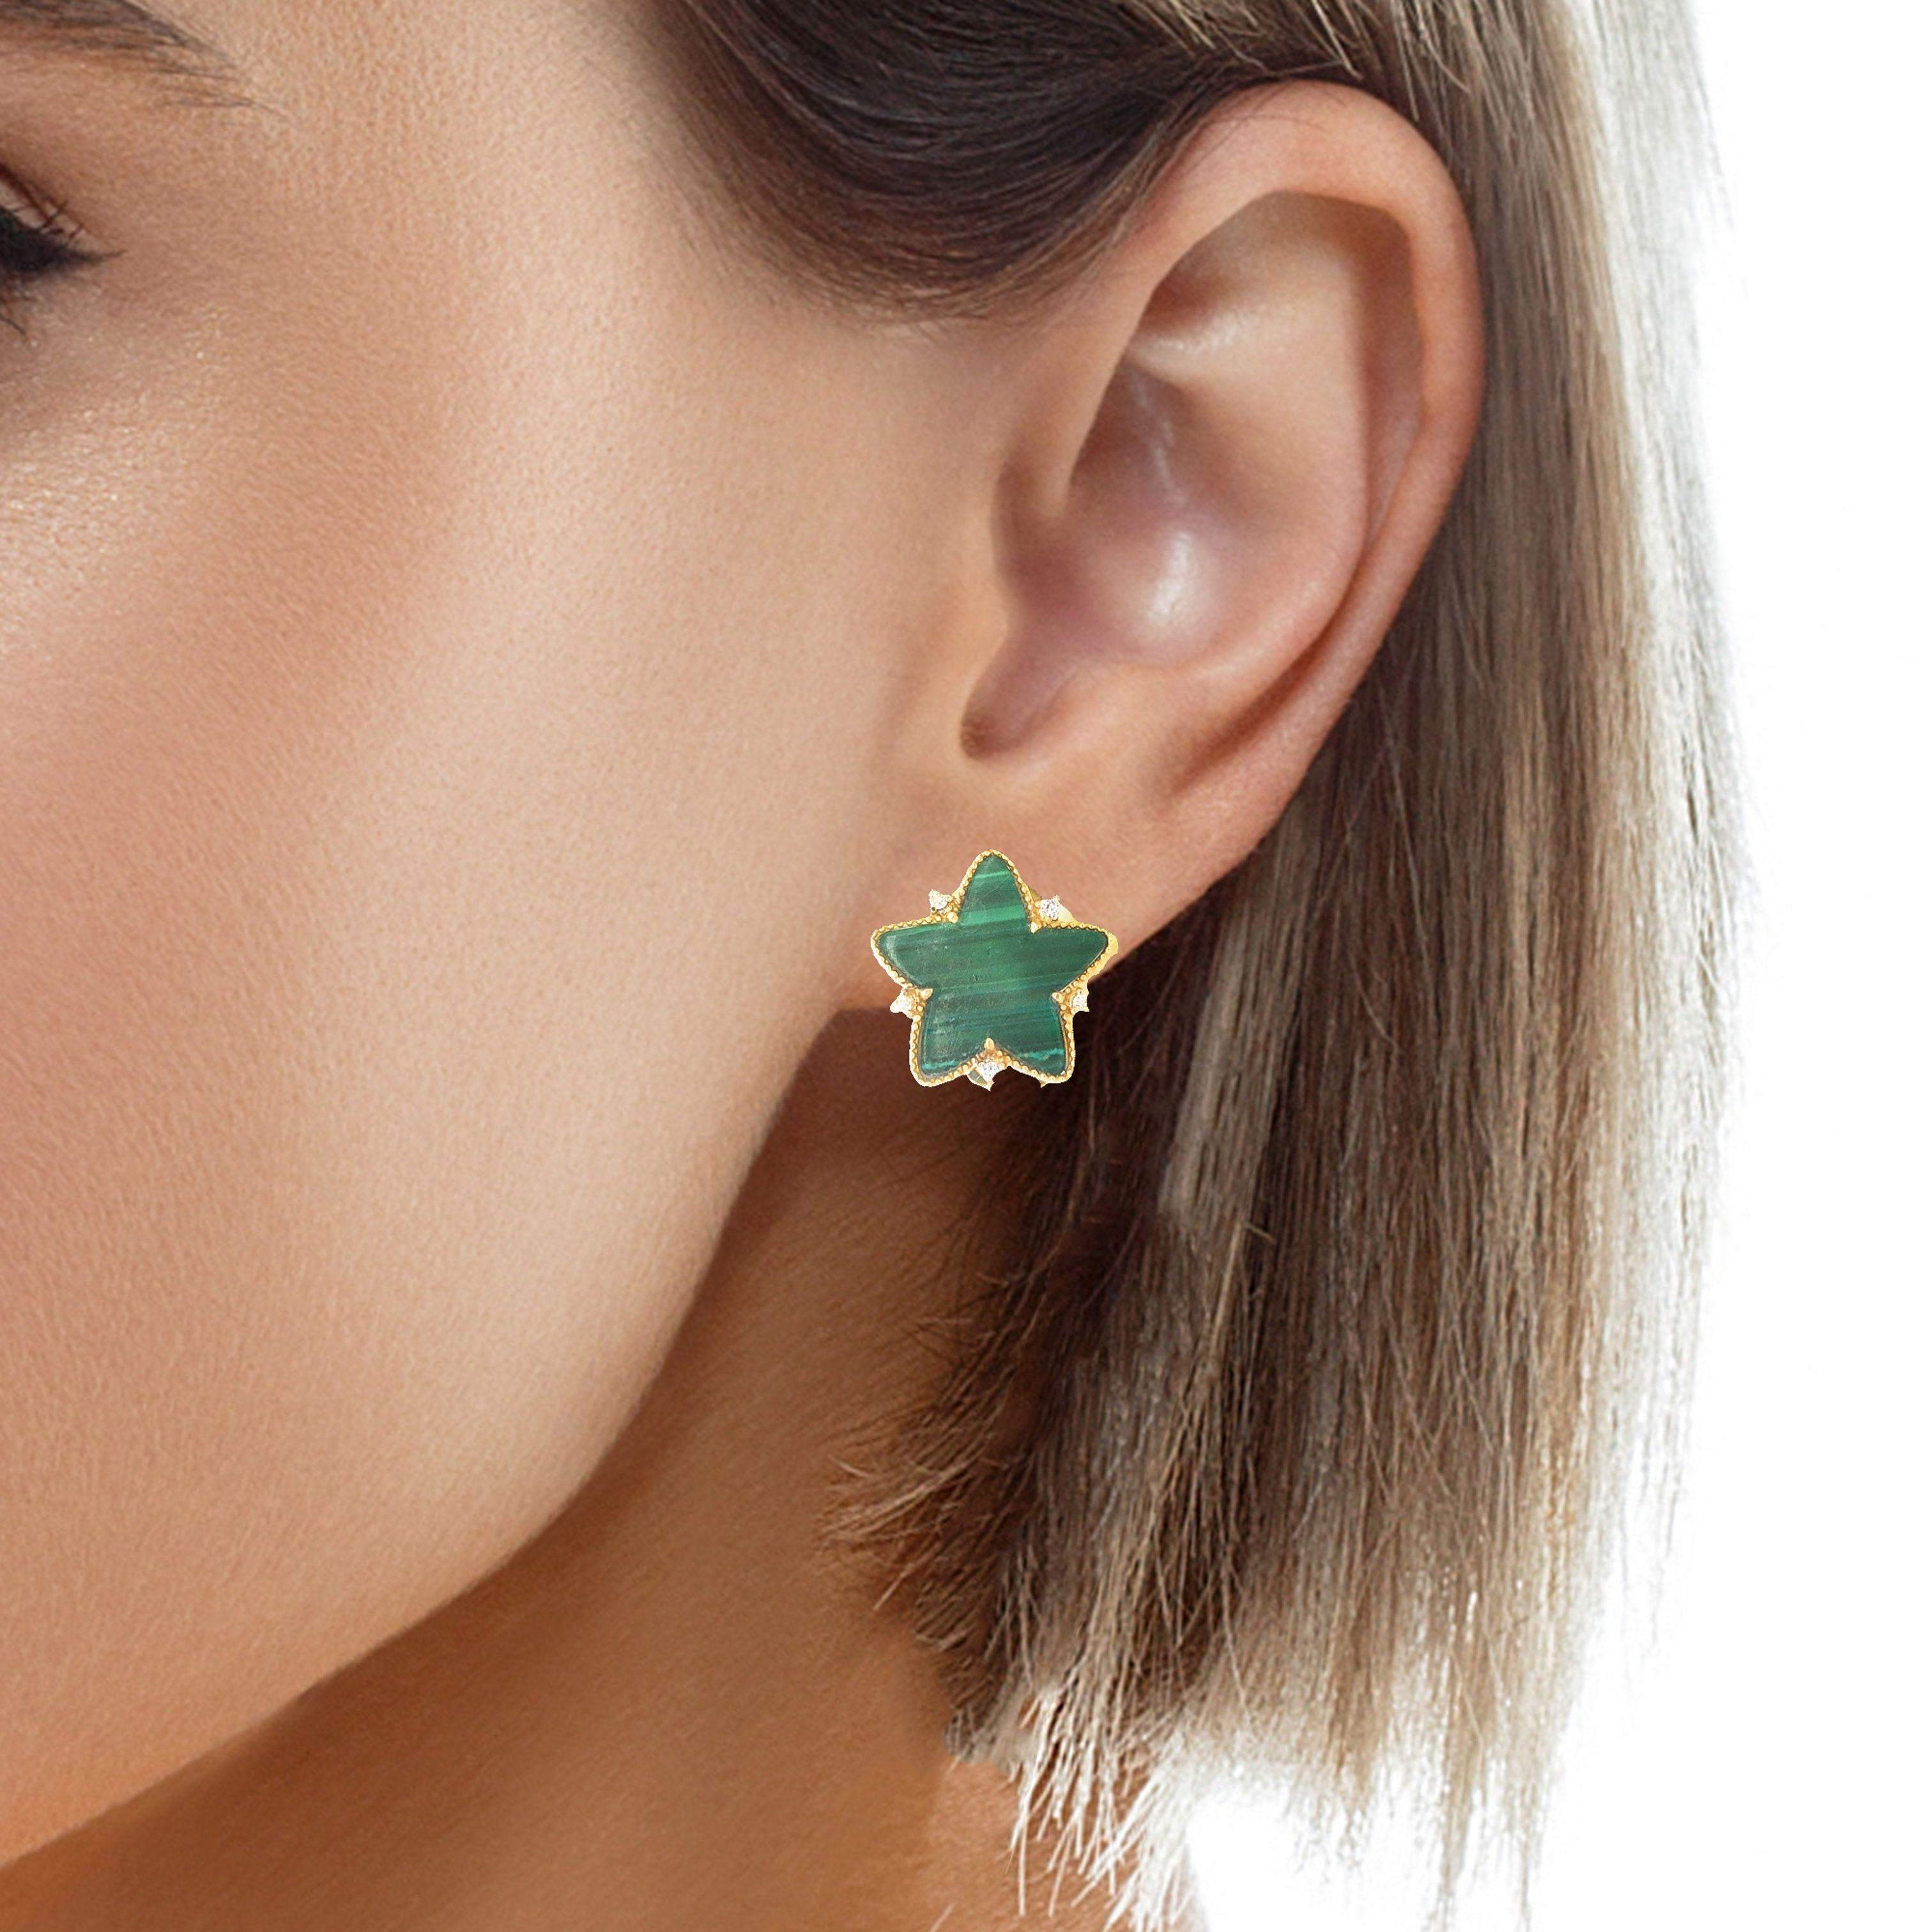 The 18K yellow gold Malachite and diamond star earrings are a delightful choice for everyday wear. The vibrant green color of the Malachite adds a playful touch to any outfit. These earrings are not only stylish but also versatile, adding a fun and